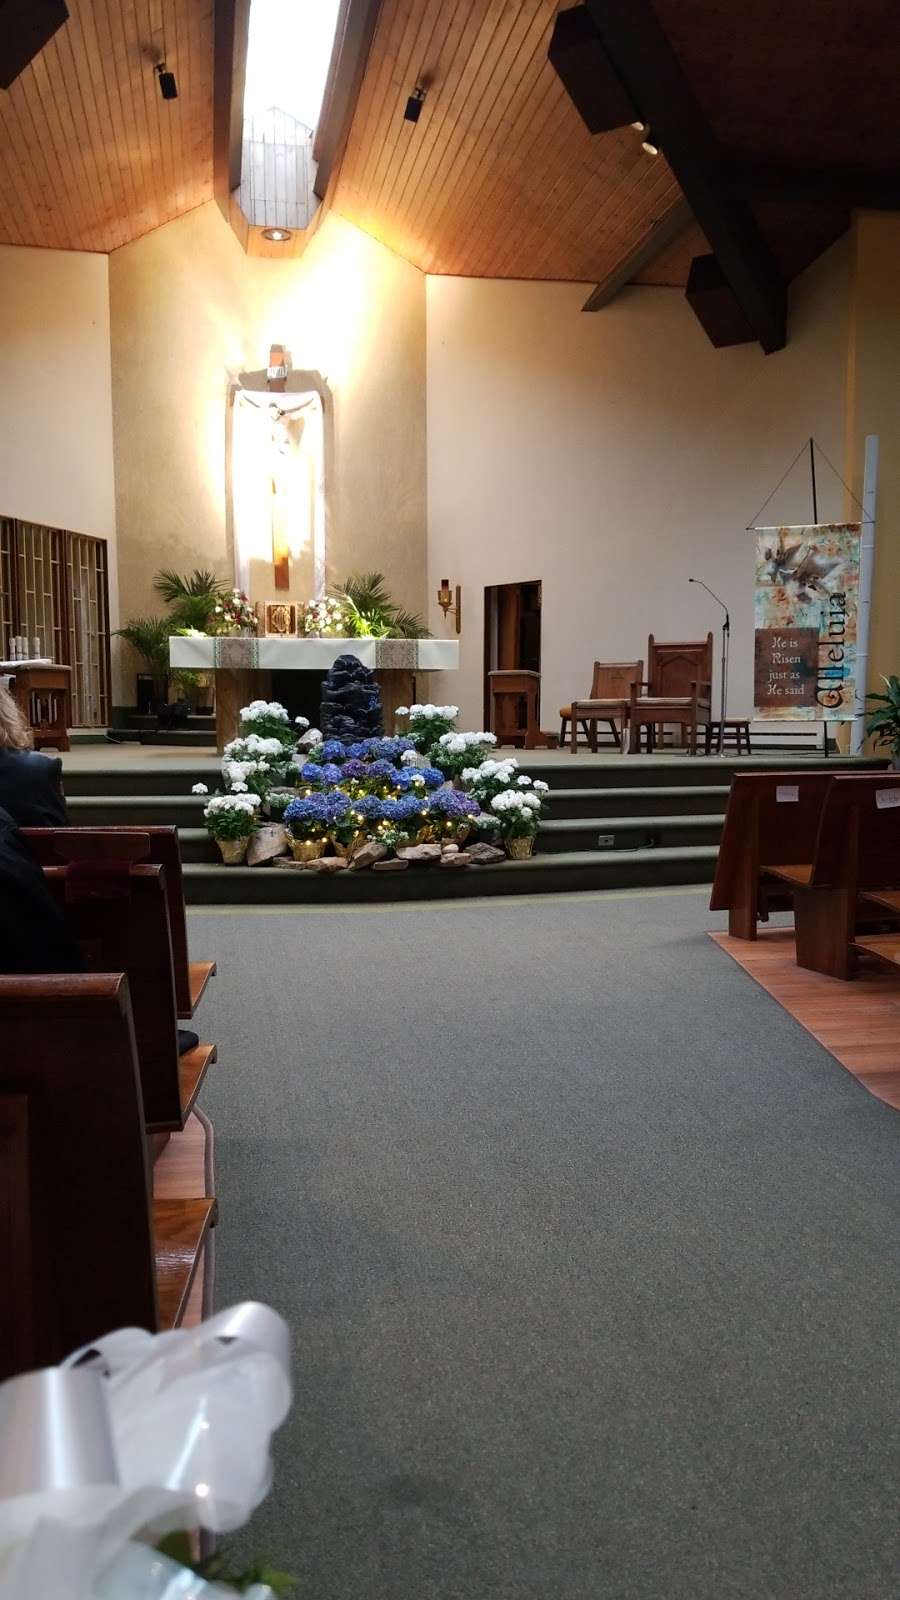 Our Lady of the Immaculate Conception | 898 Centre St, Freeland, PA 18224 | Phone: (570) 636-3035